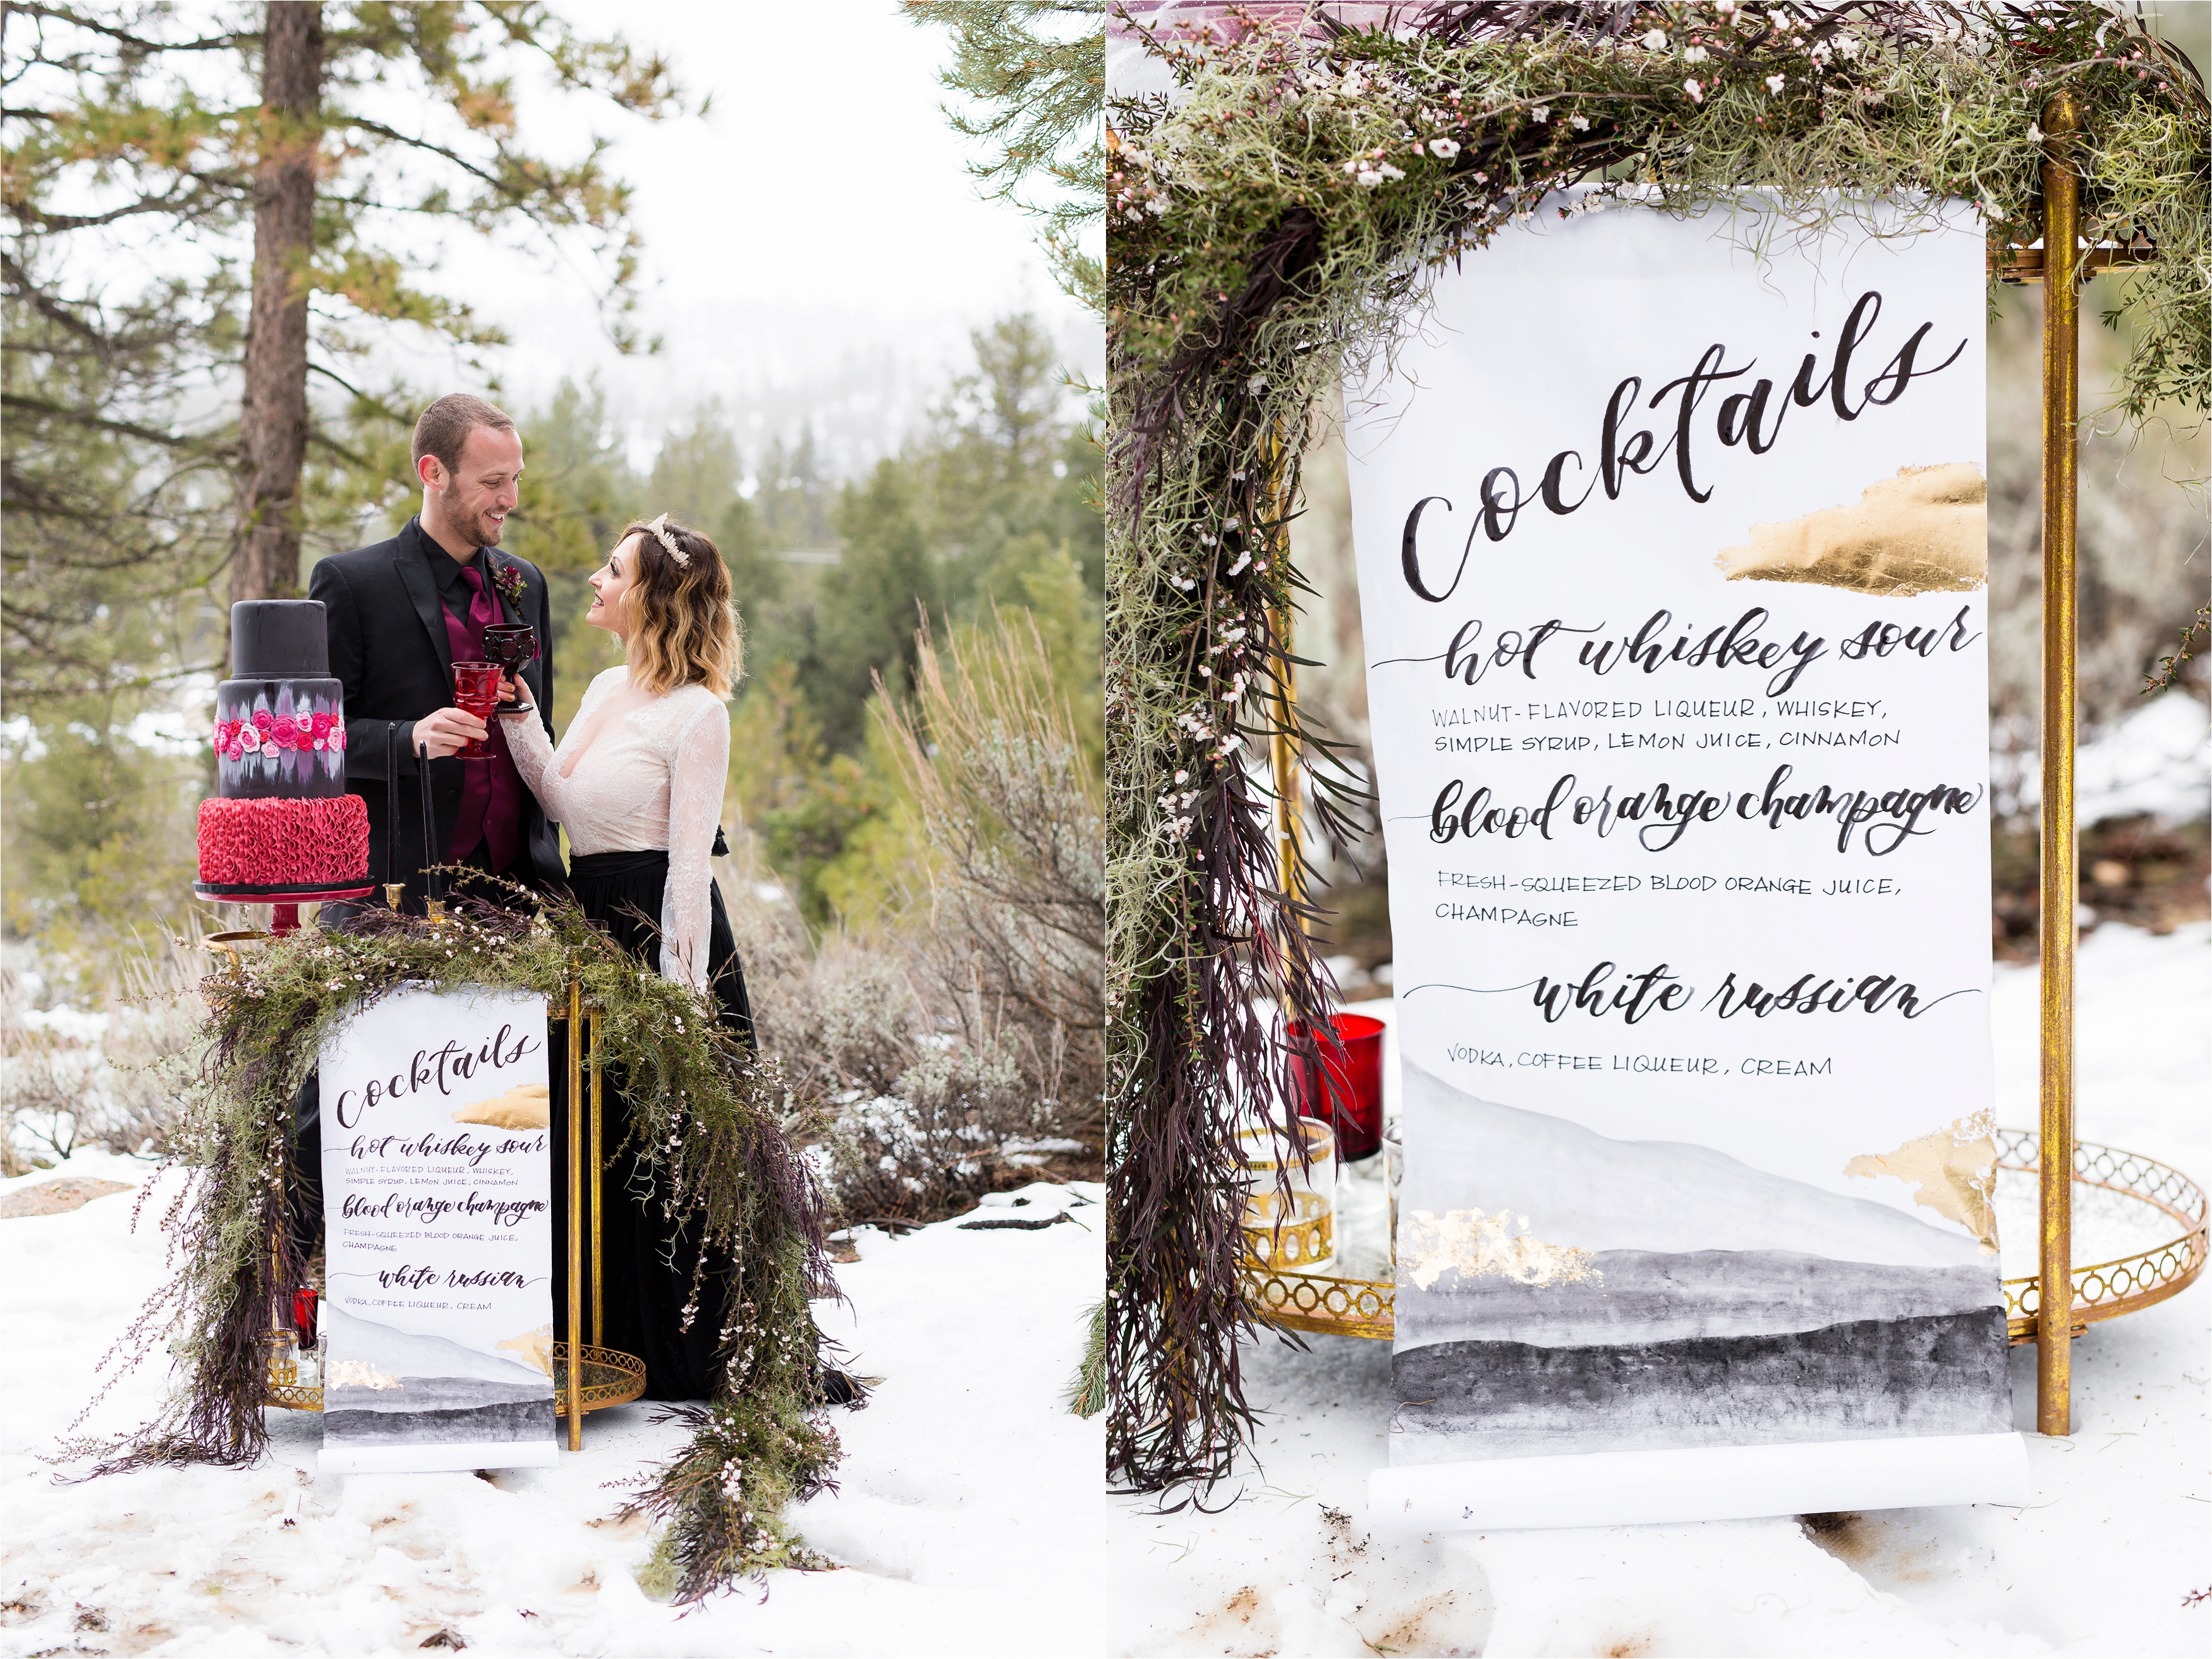 Wedding couple toasts at cake table during reception in snow, CA